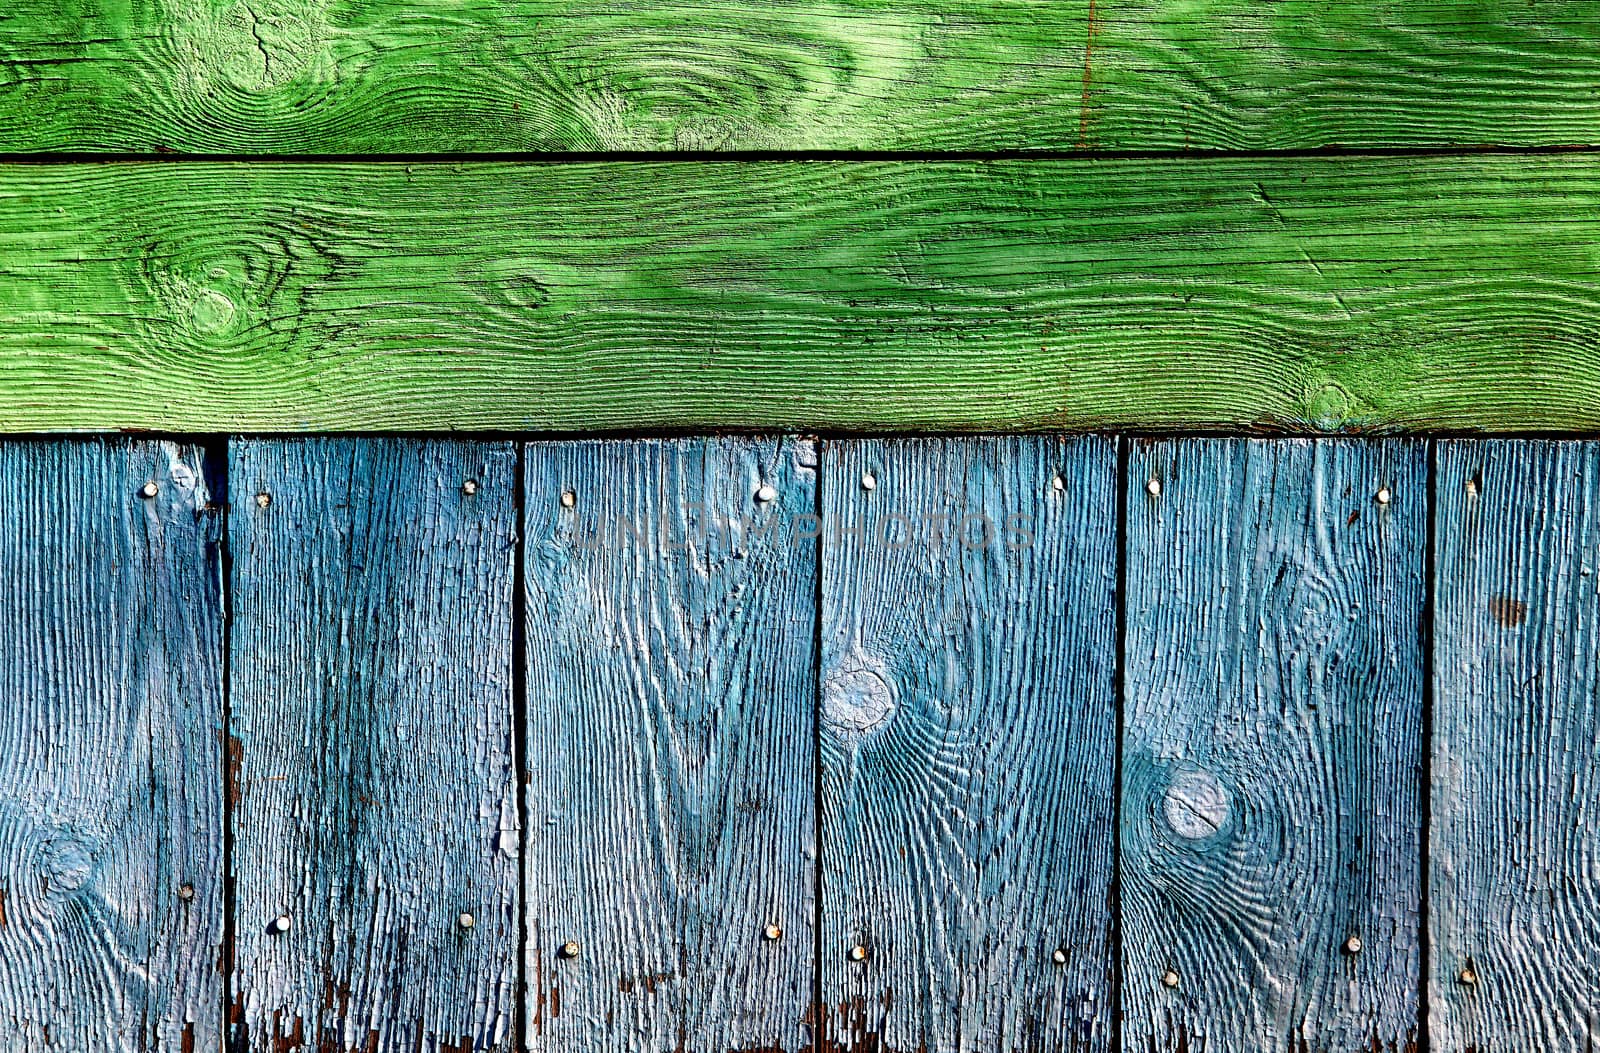 Green and Blue Old Wooden Planks with Weathered Paint